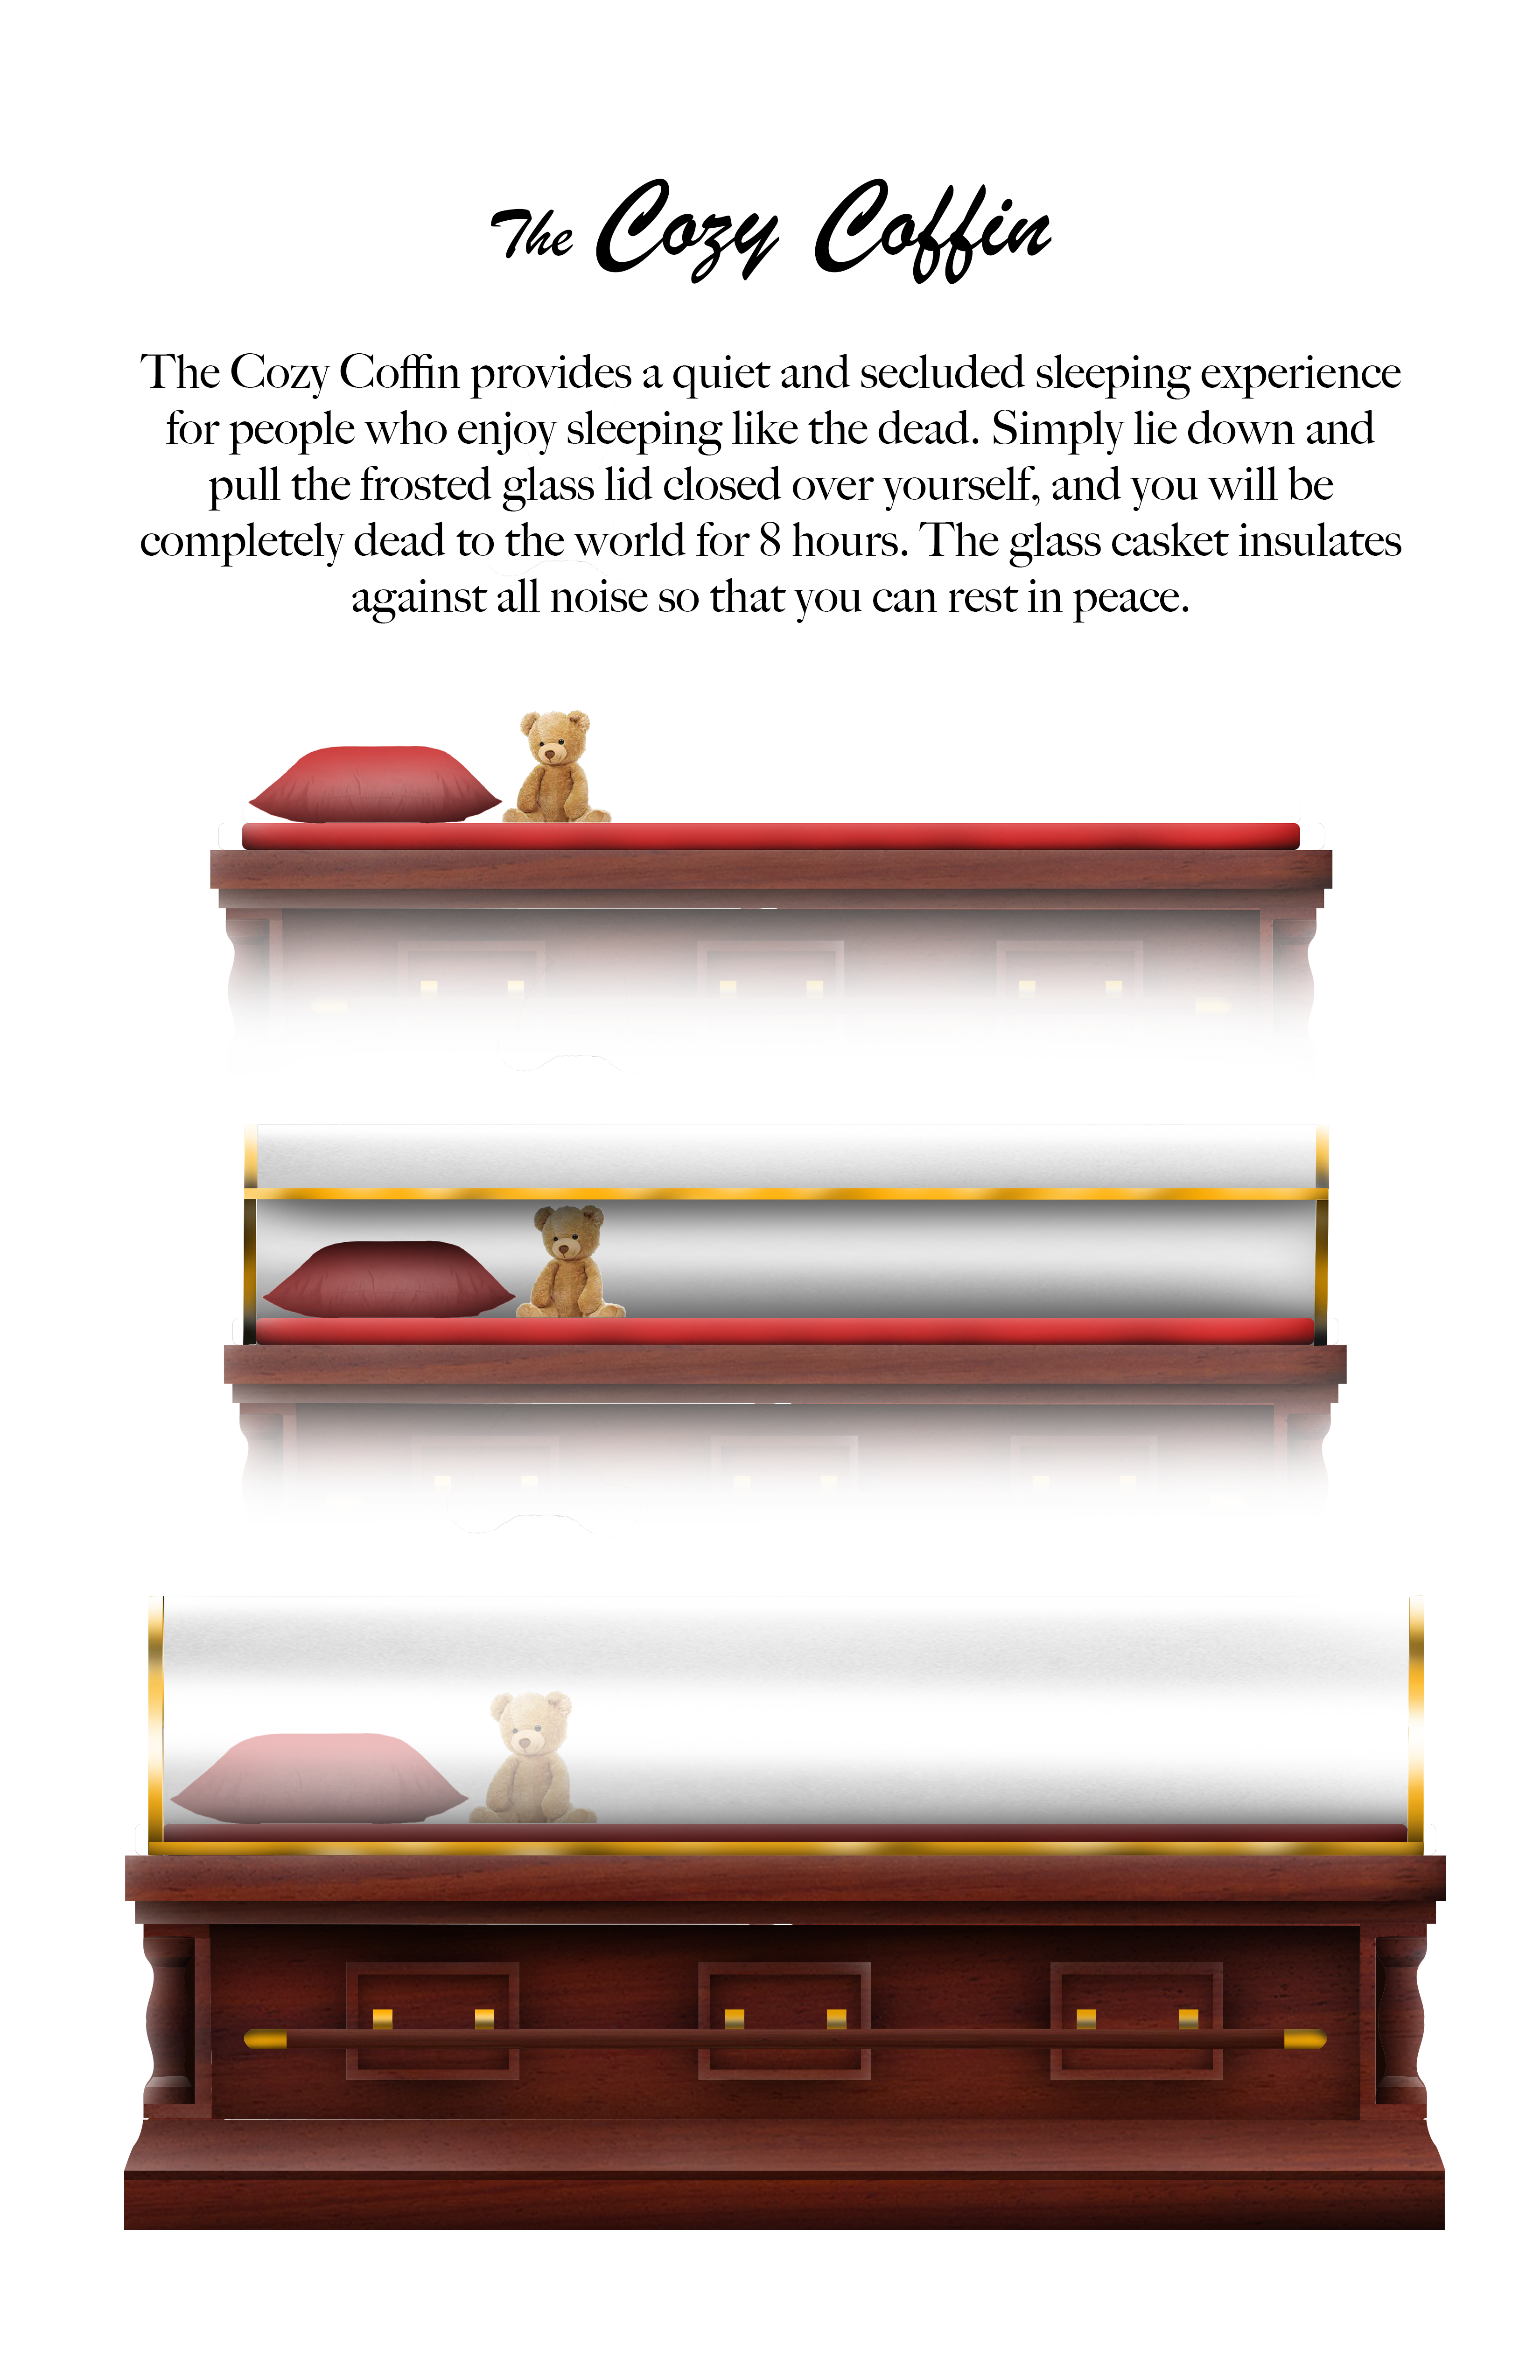 Poster advertizing the 'Cozy Coffin.'